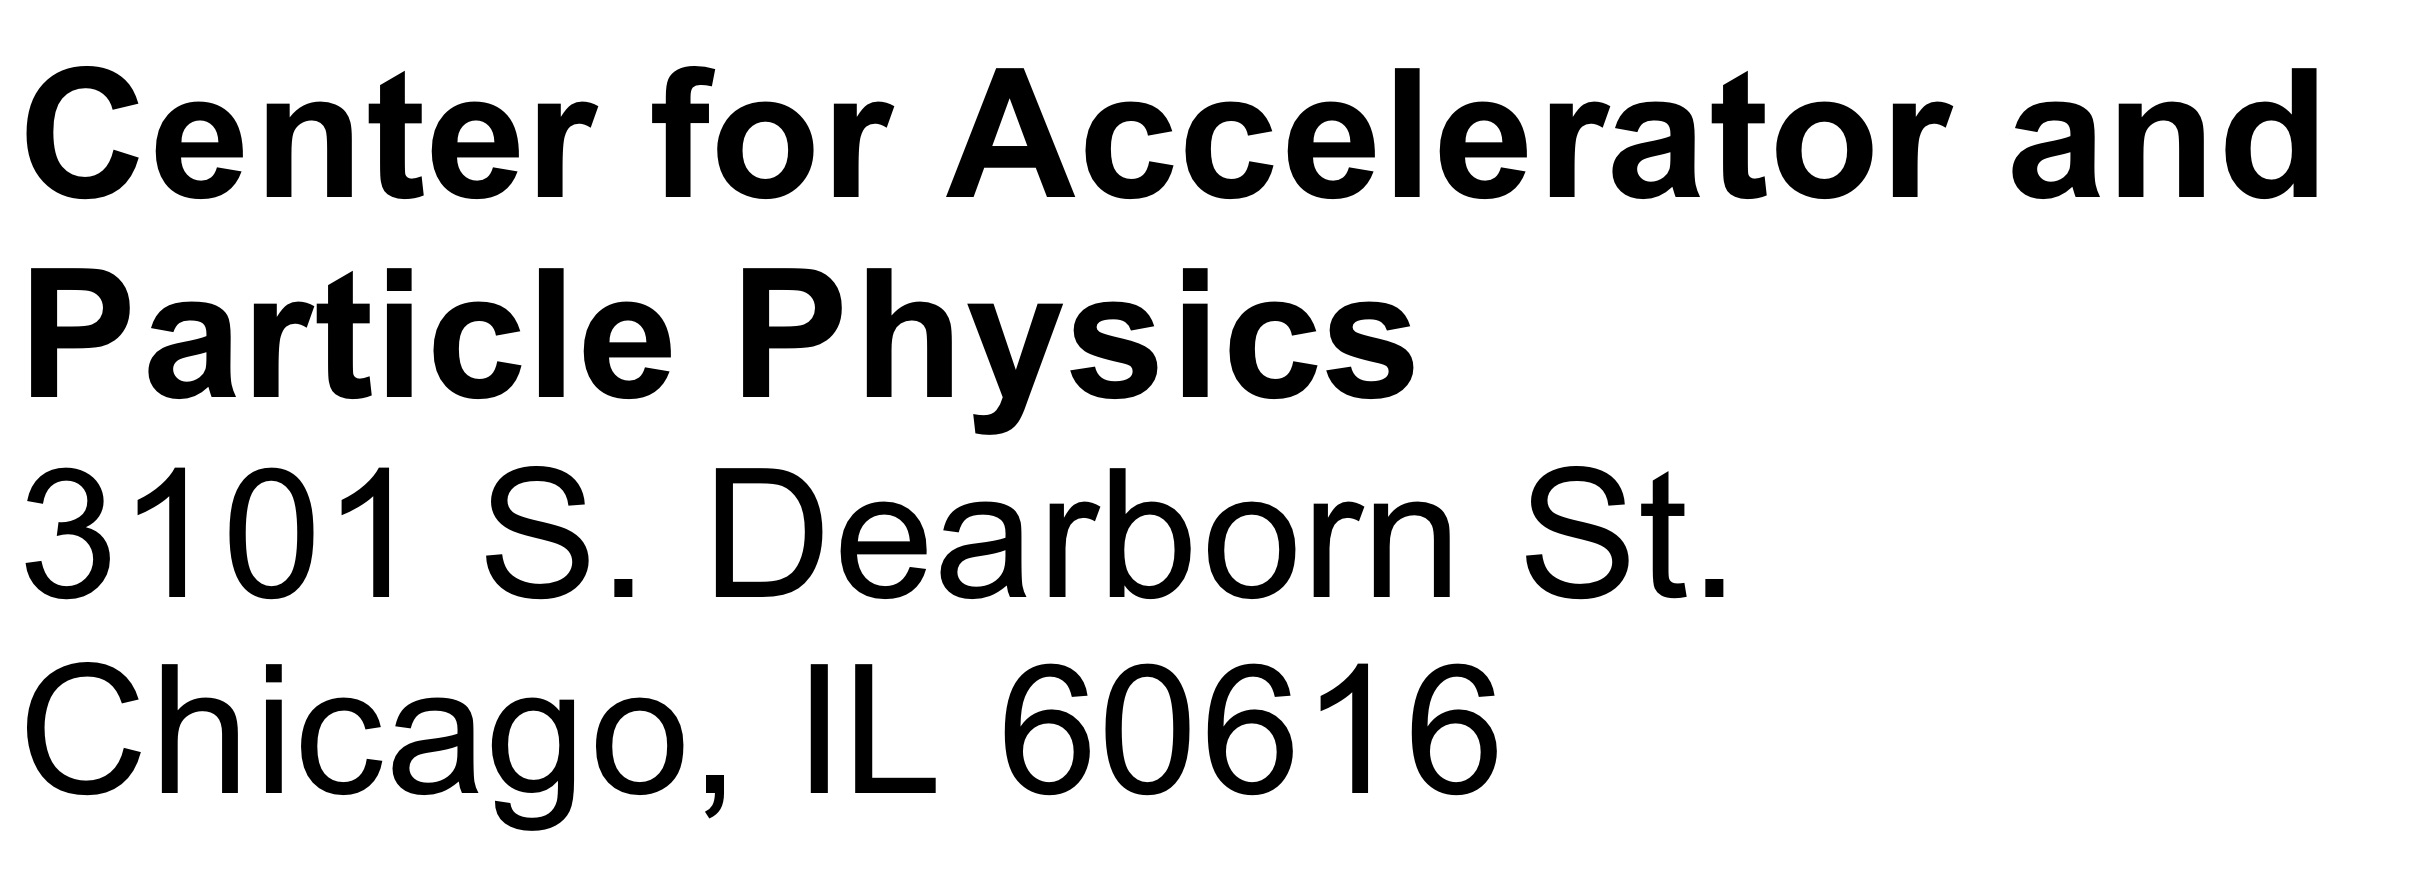 Text Box: Center for Accelerator and Particle Physics3101 S. Dearborn St.Chicago, IL 60616